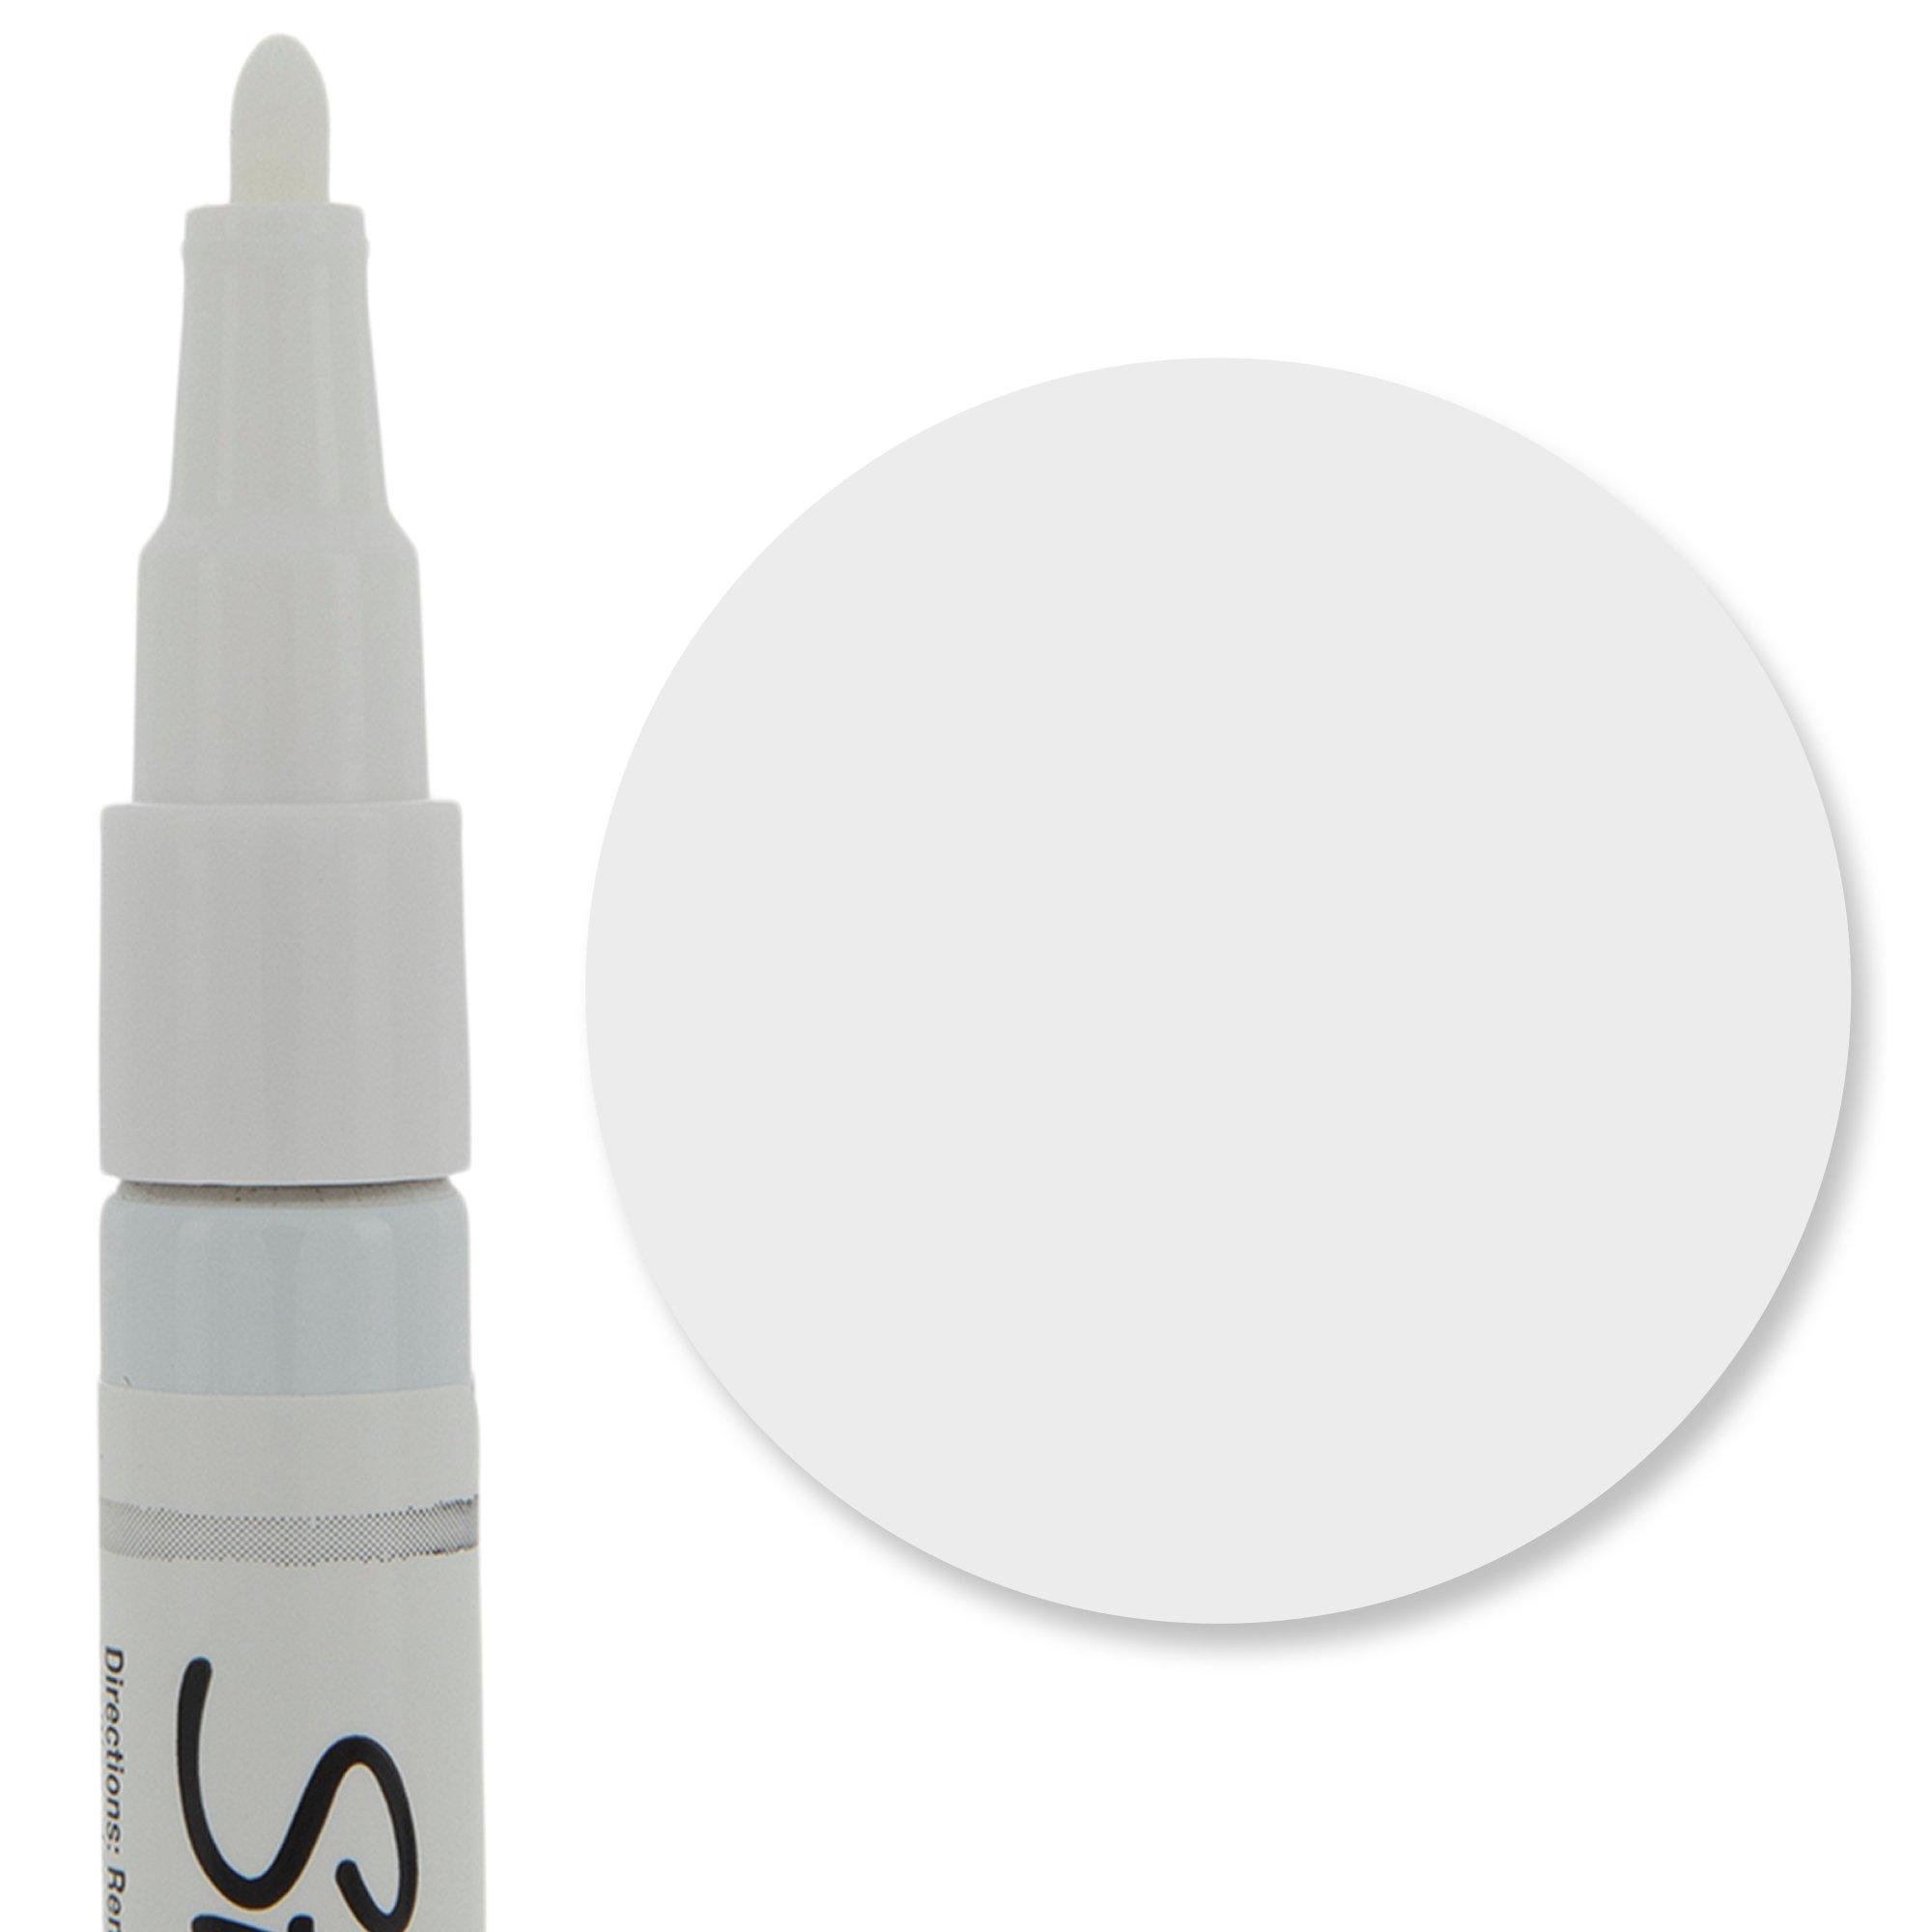 Paint Markers - White, Fine Point, without Rubber Grip, NSN  7520-01-207-4159 - The ArmyProperty Store